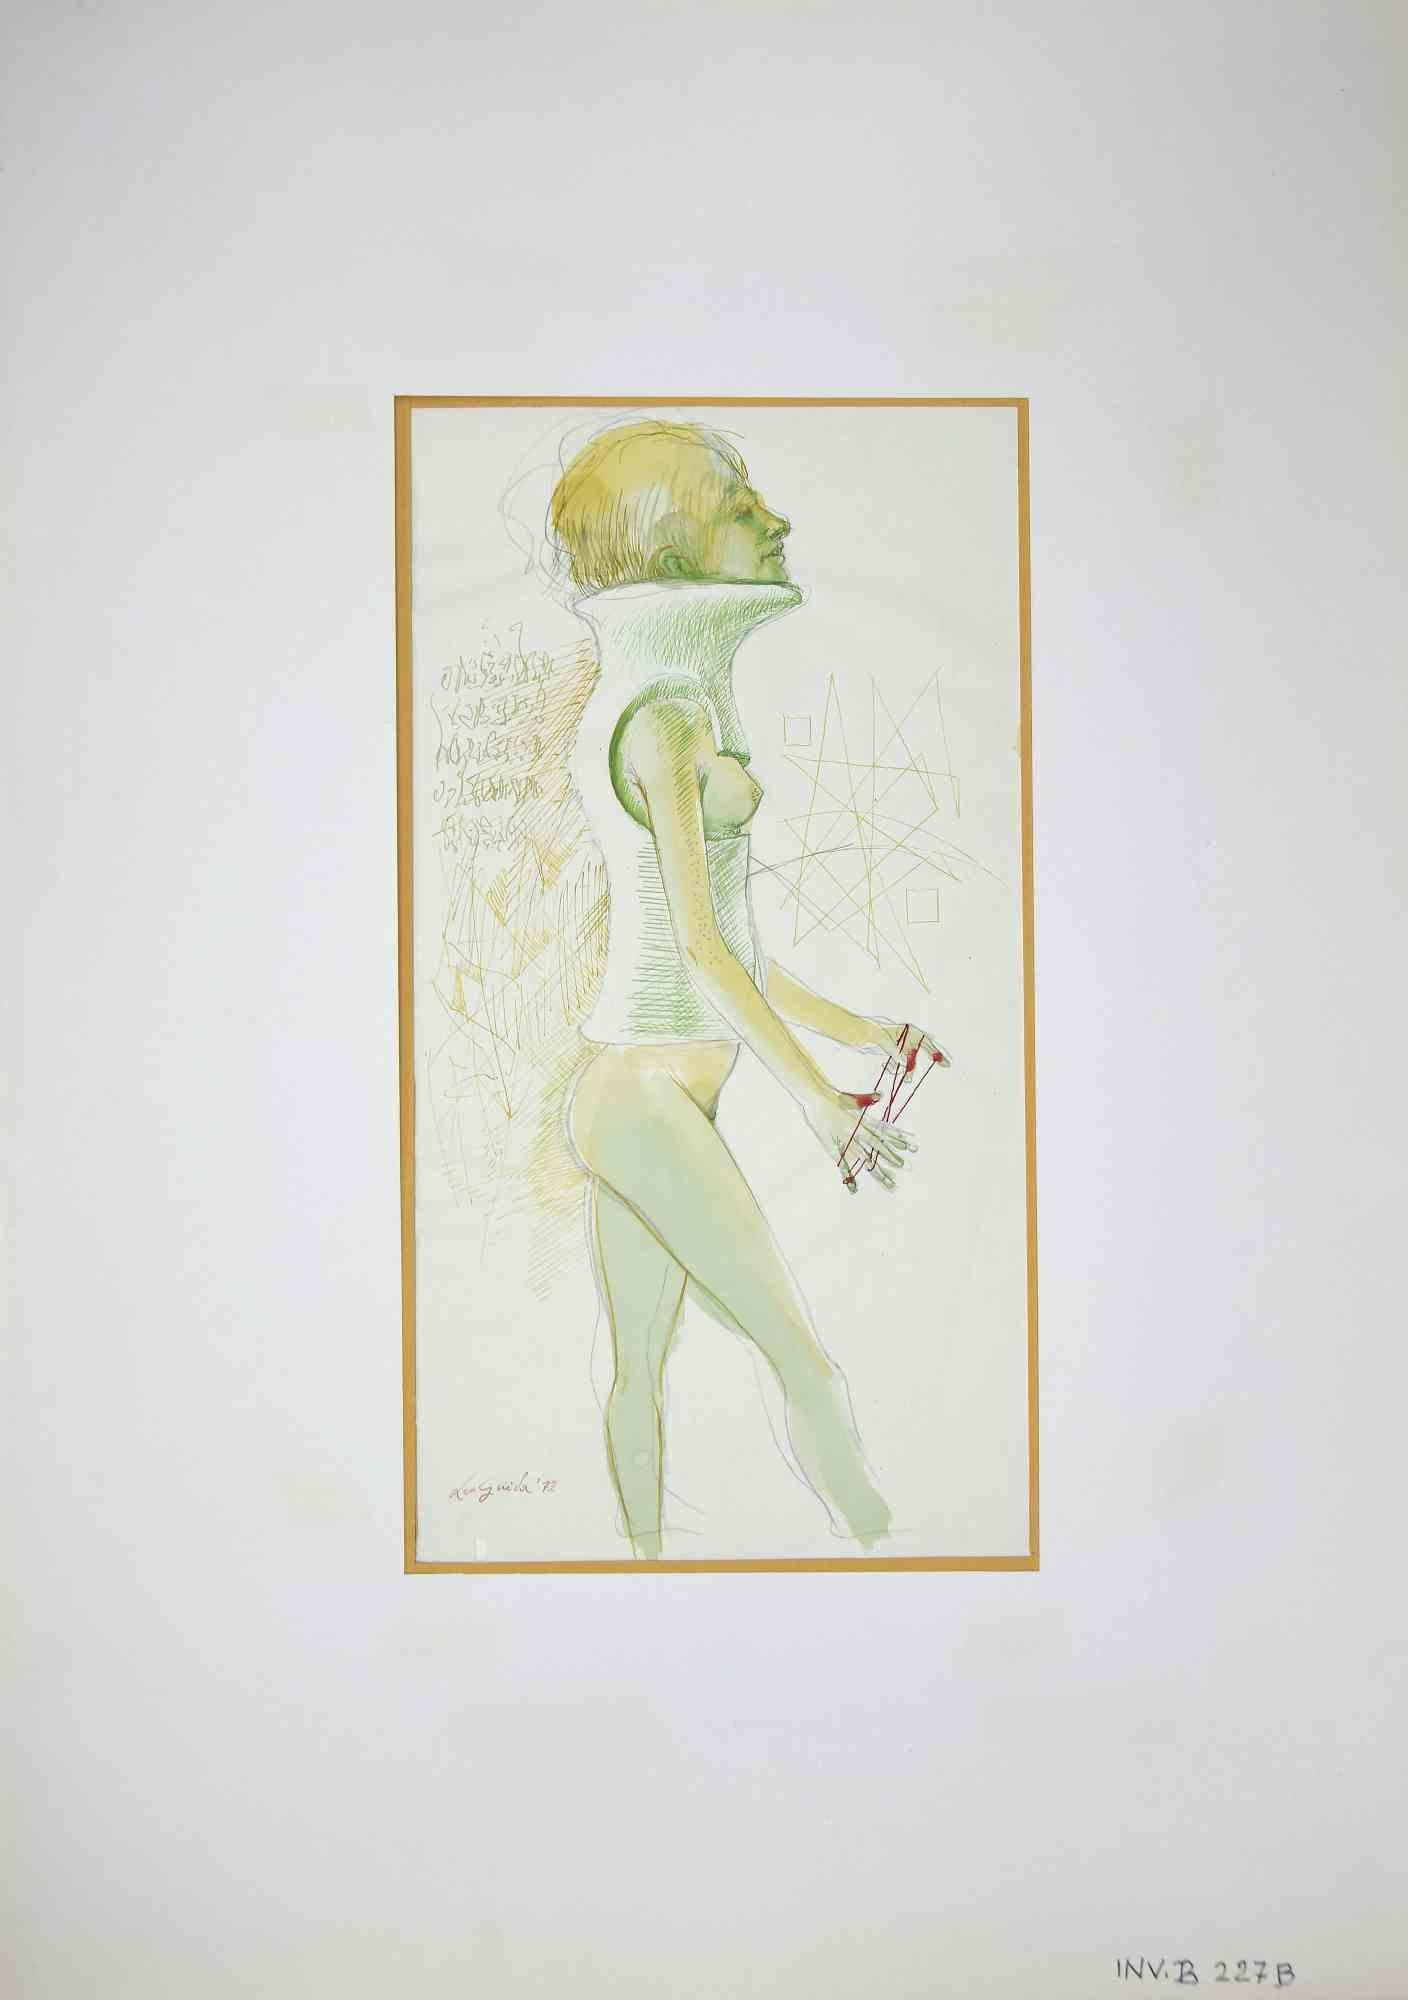 Female Nude is an original drawing in ink and watercolor realized by Leo Guida in 1972.

Good condition.

Hand-signed.

Leo Guida  (1992 - 2017). Sensitive to current issues, artistic movements and historical techniques, Leo Guida has been able to